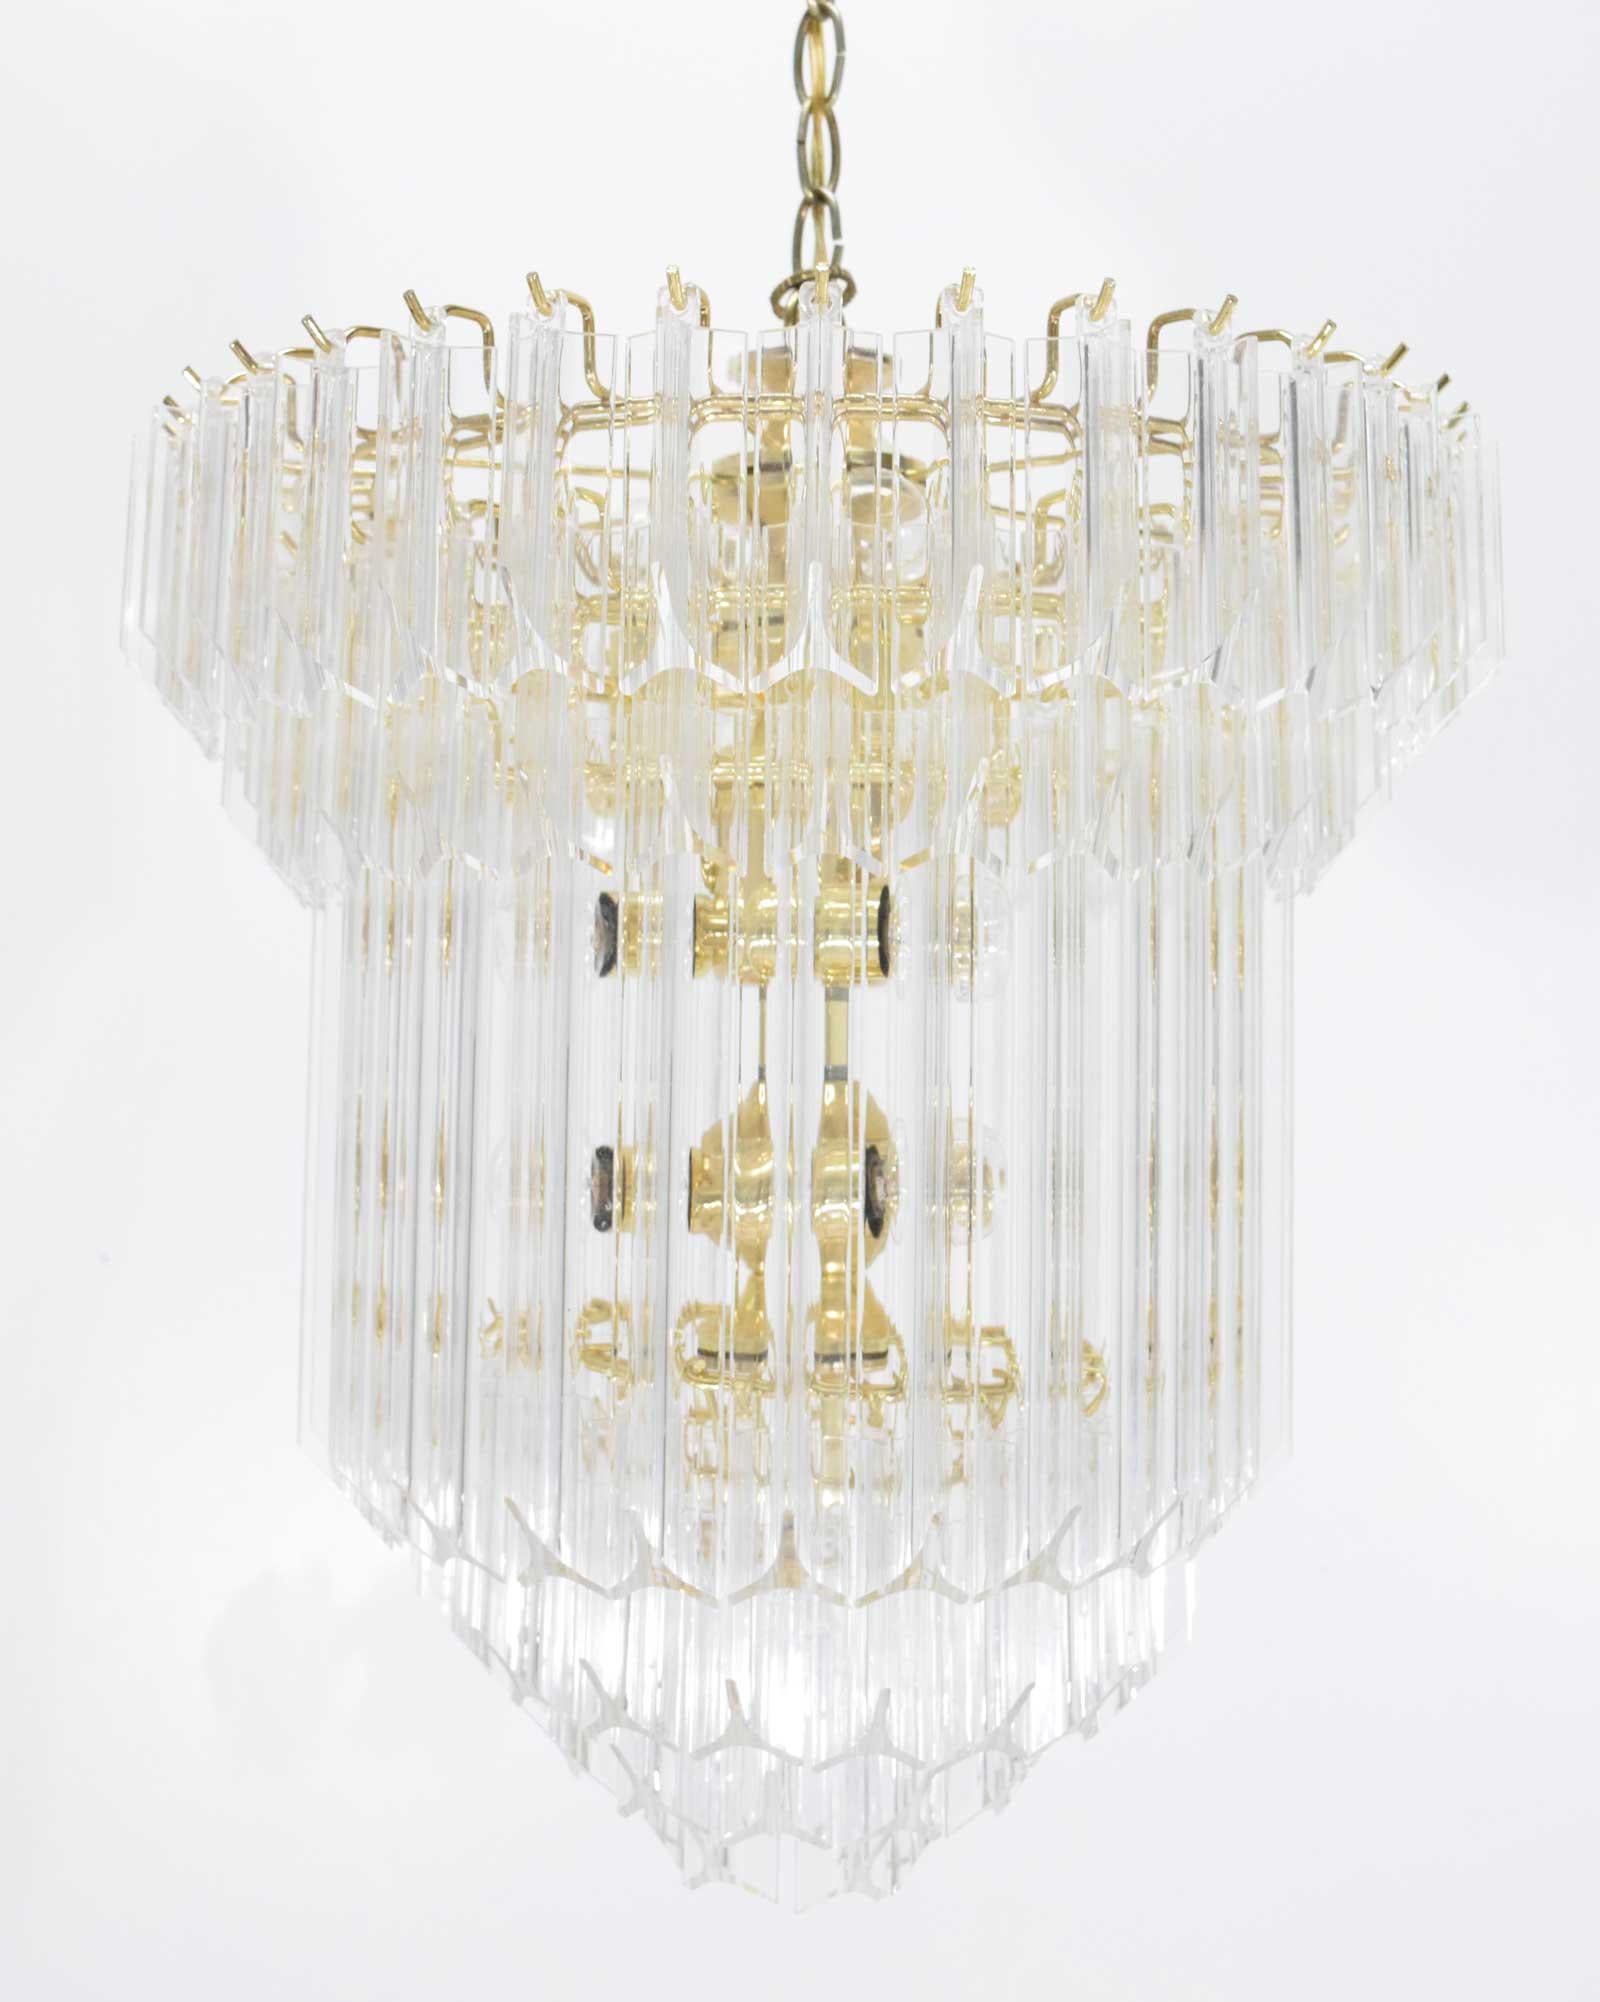 Very nice Lucite, acrylic chandelier with acrylic prisms cascading from a wire frame. Six tiers. Height of 19